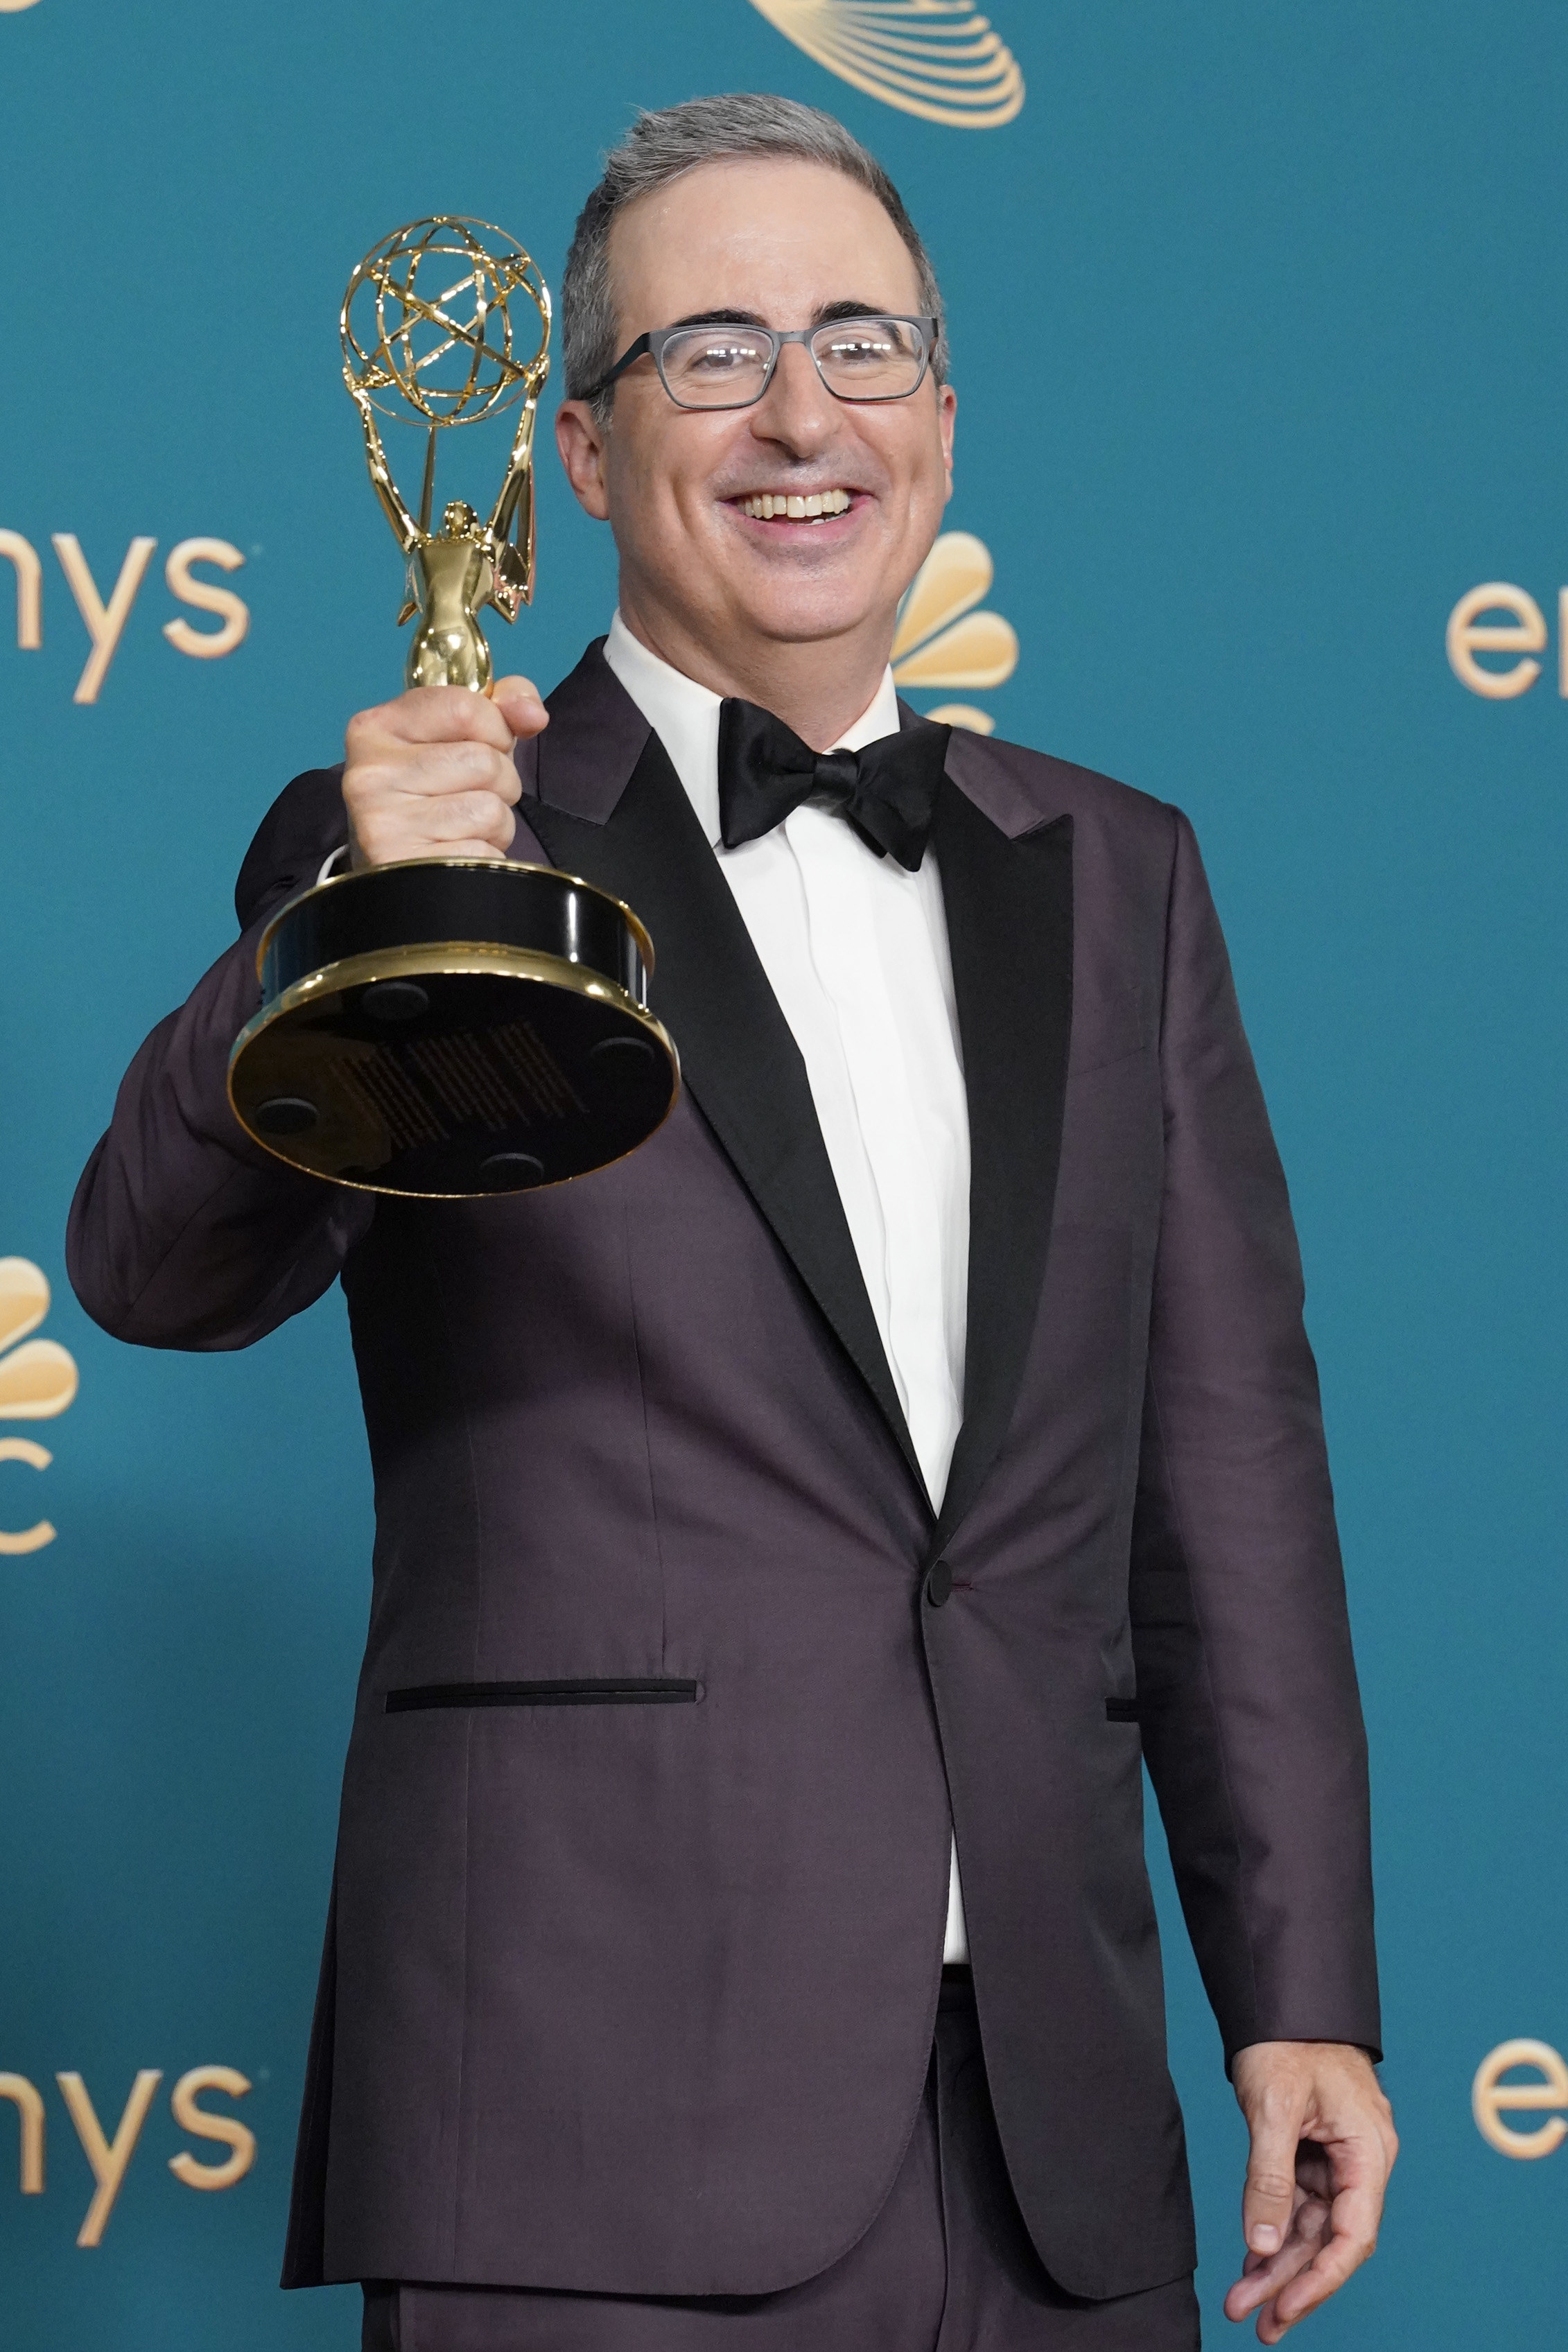 John Oliver smiling and holding an Emmy